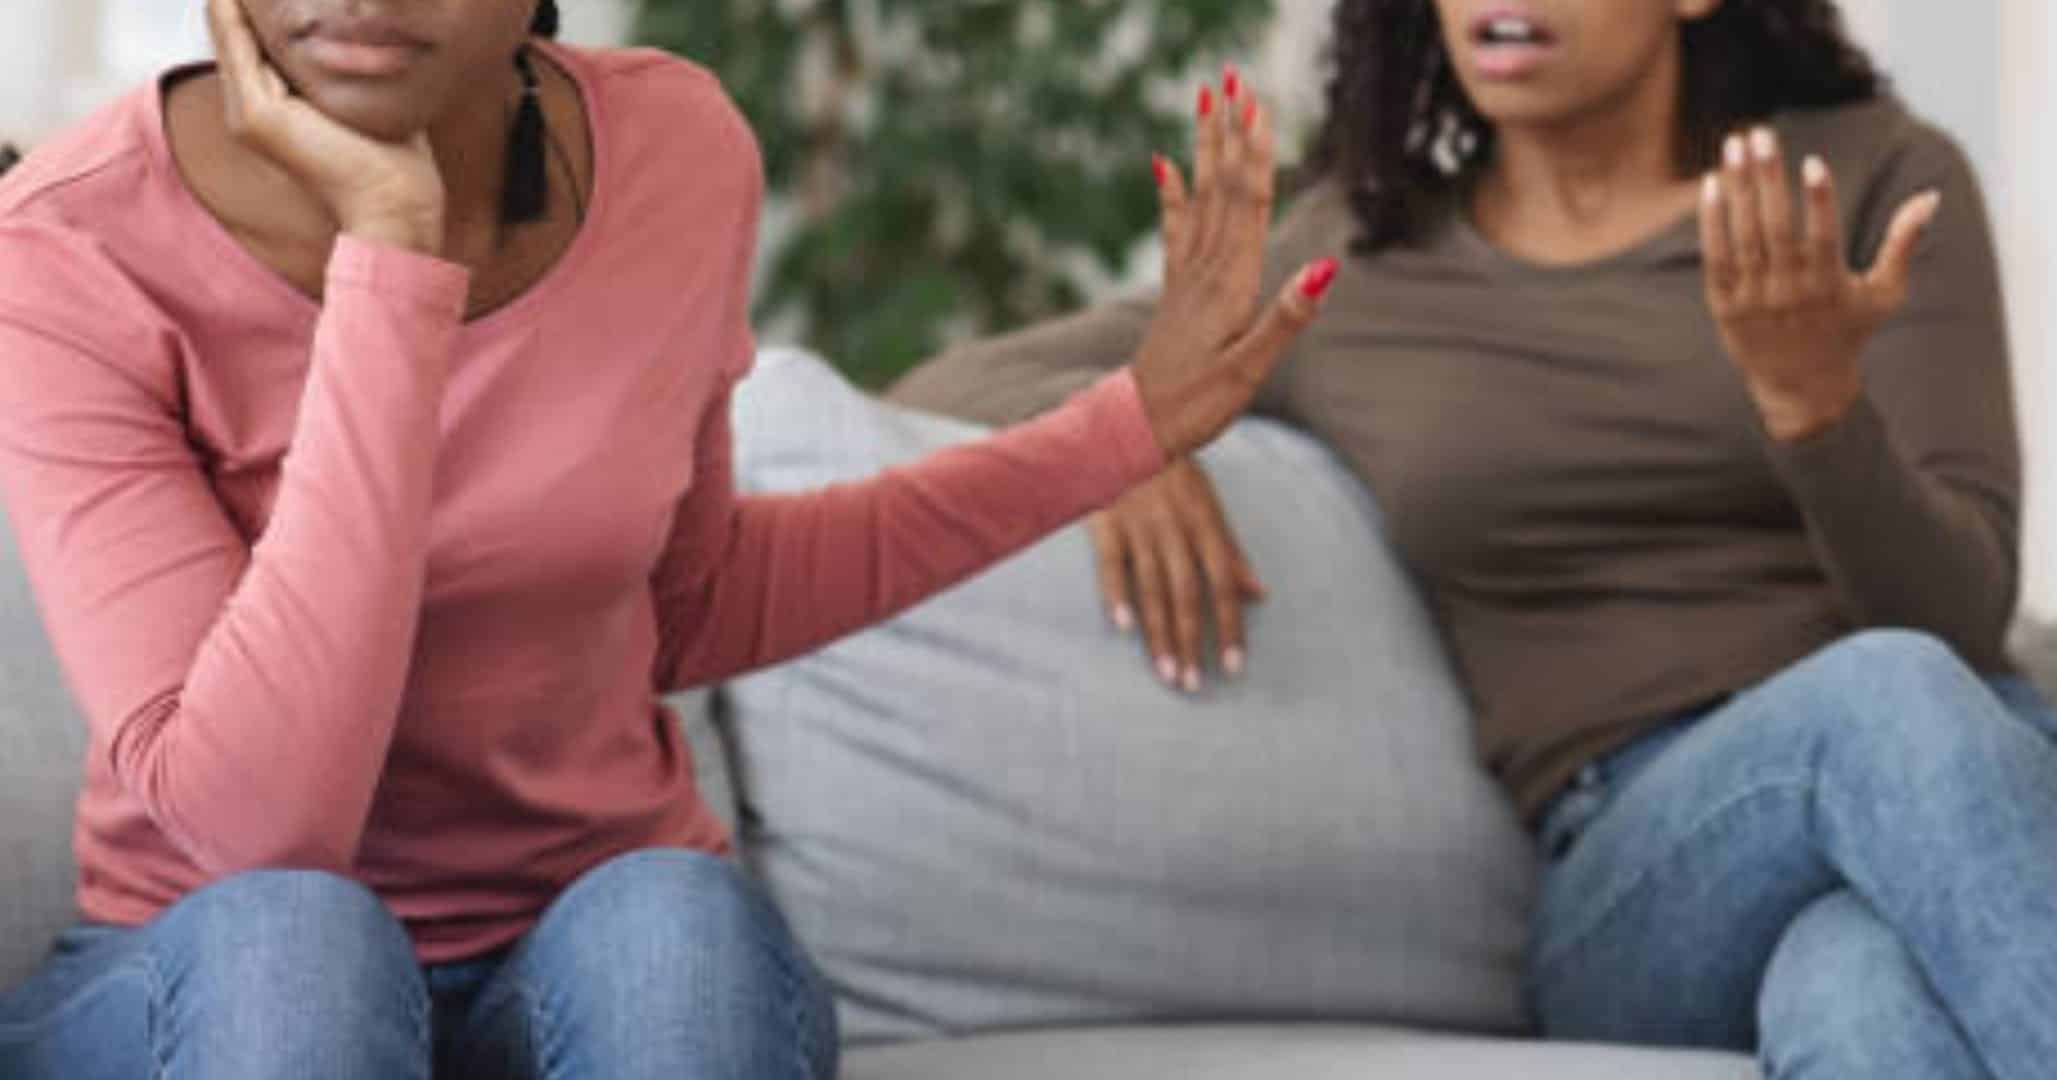 "He hasn't put a ring on your finger" – Lady defends self after getting pregnant bestie's boyfriend